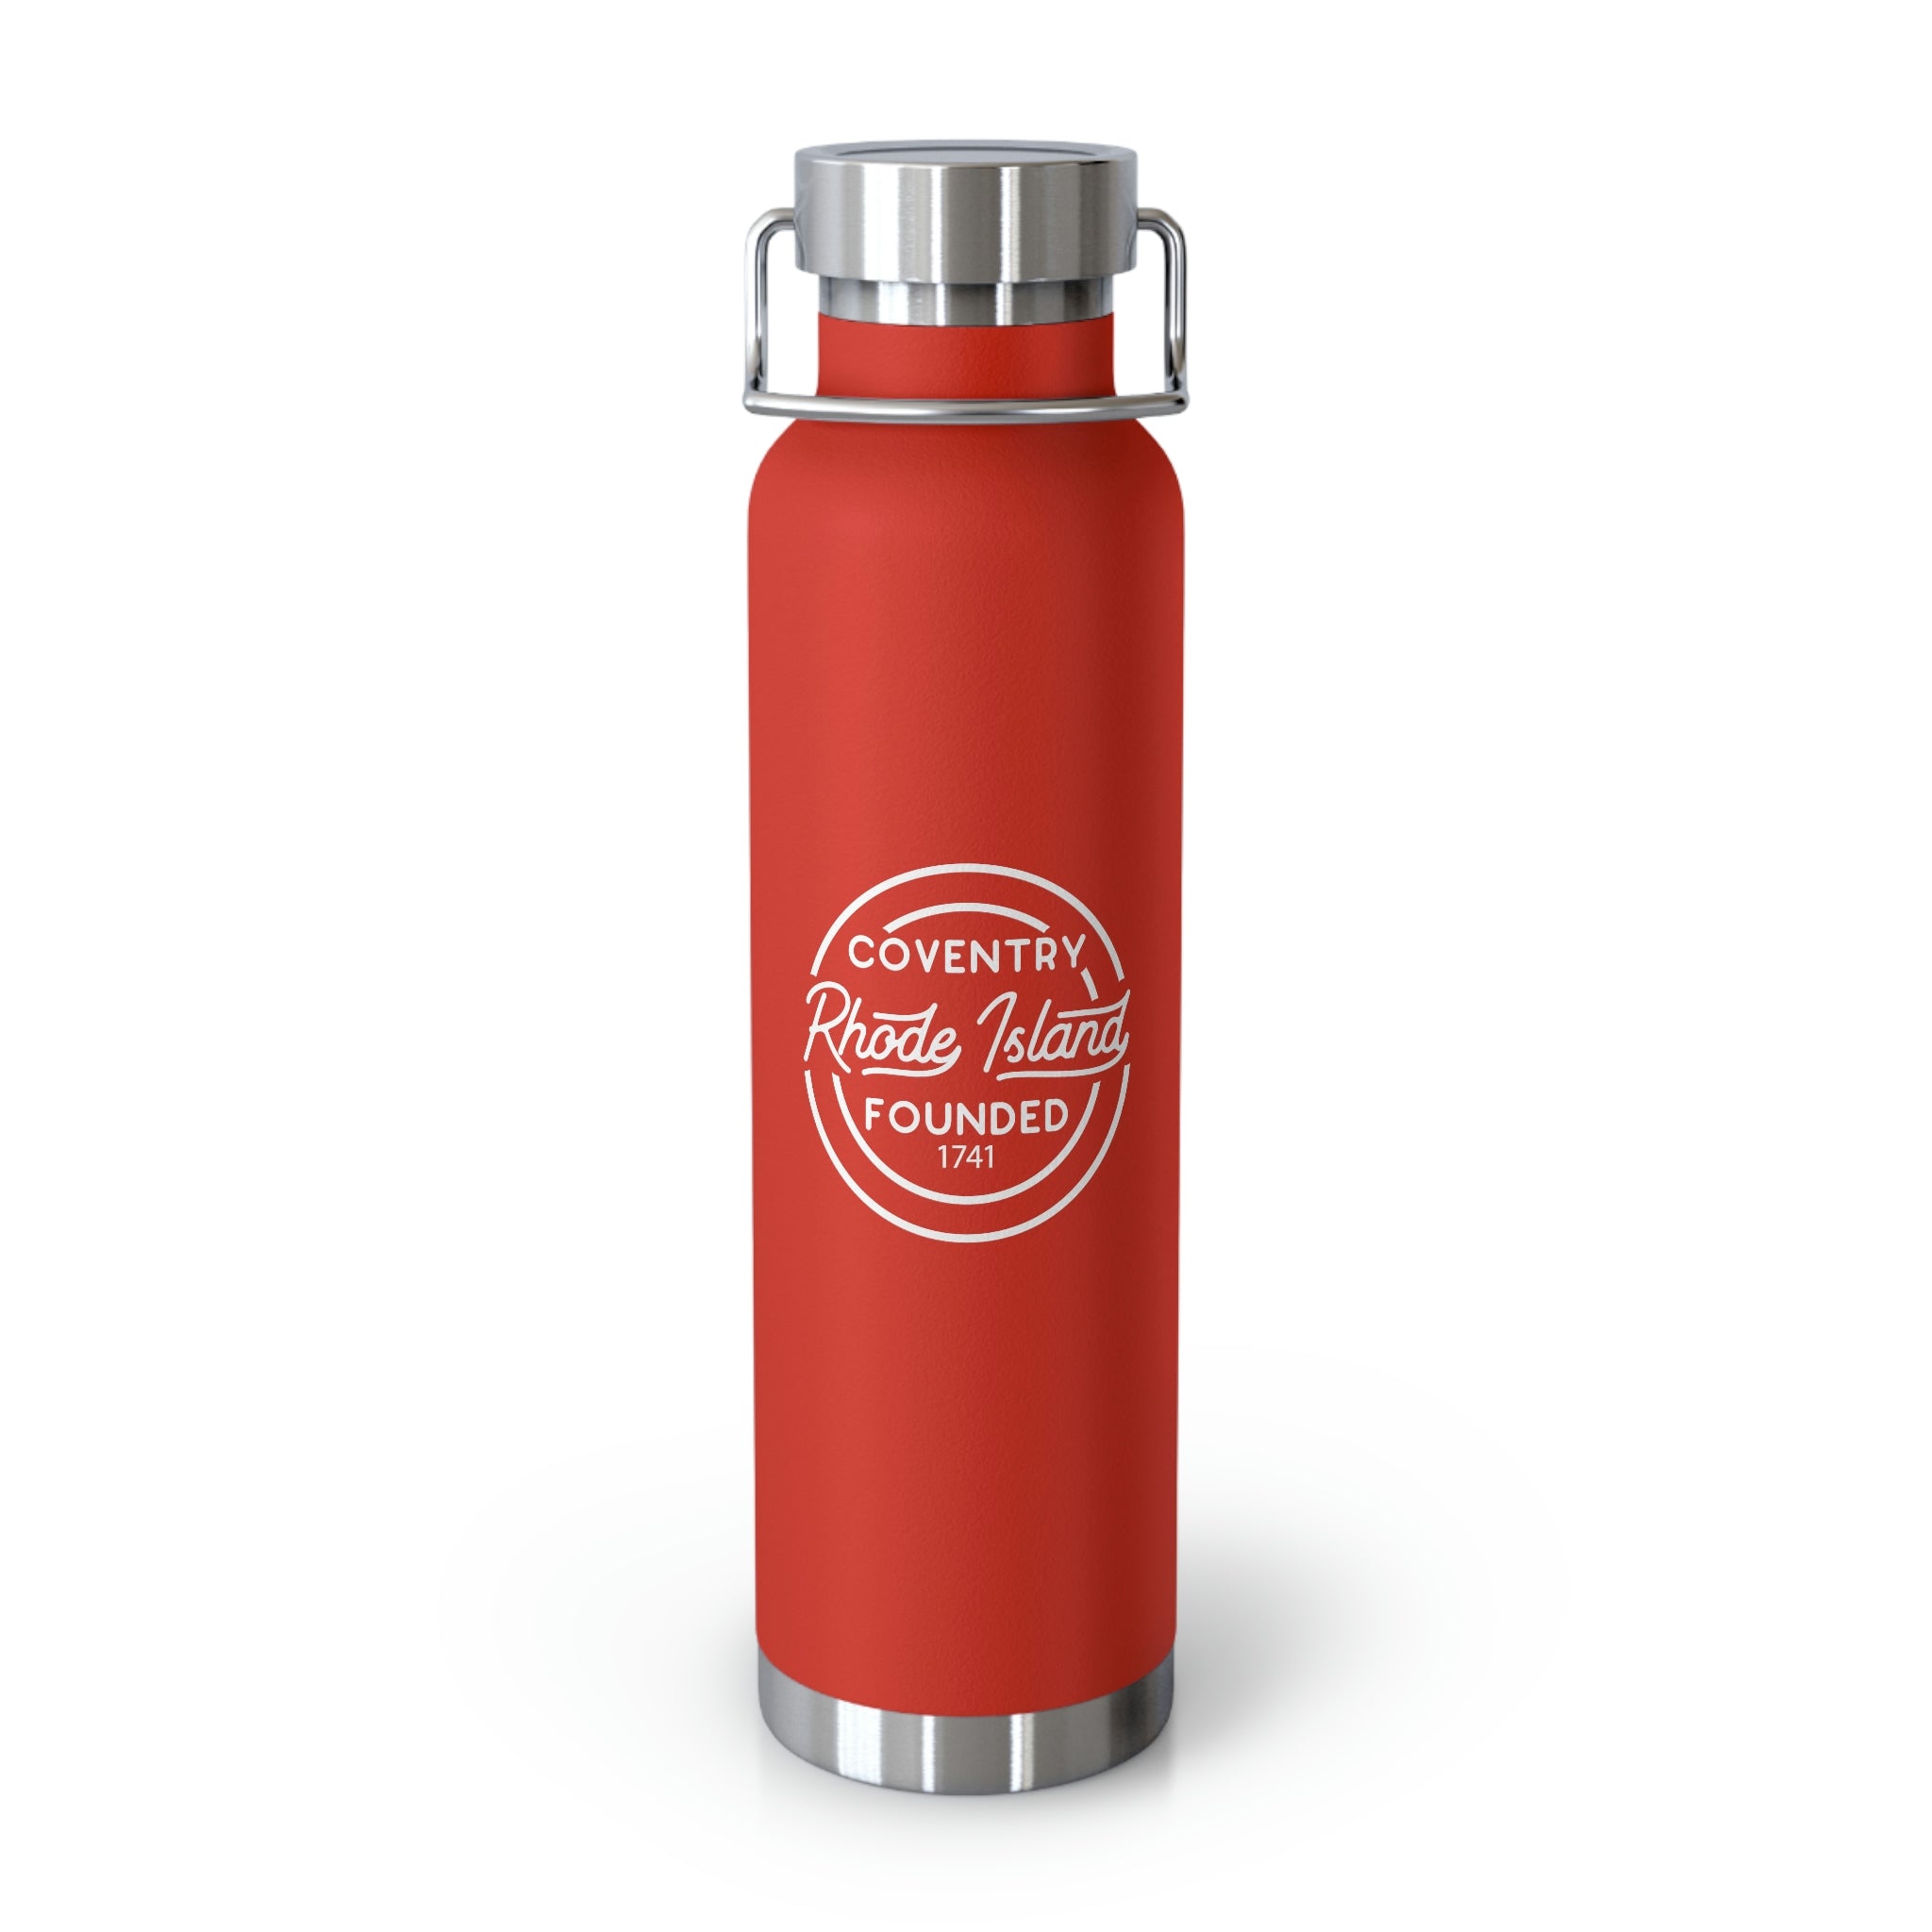 22oz Vacuum insulated tumbler for Coventry, Rhode Island in Red